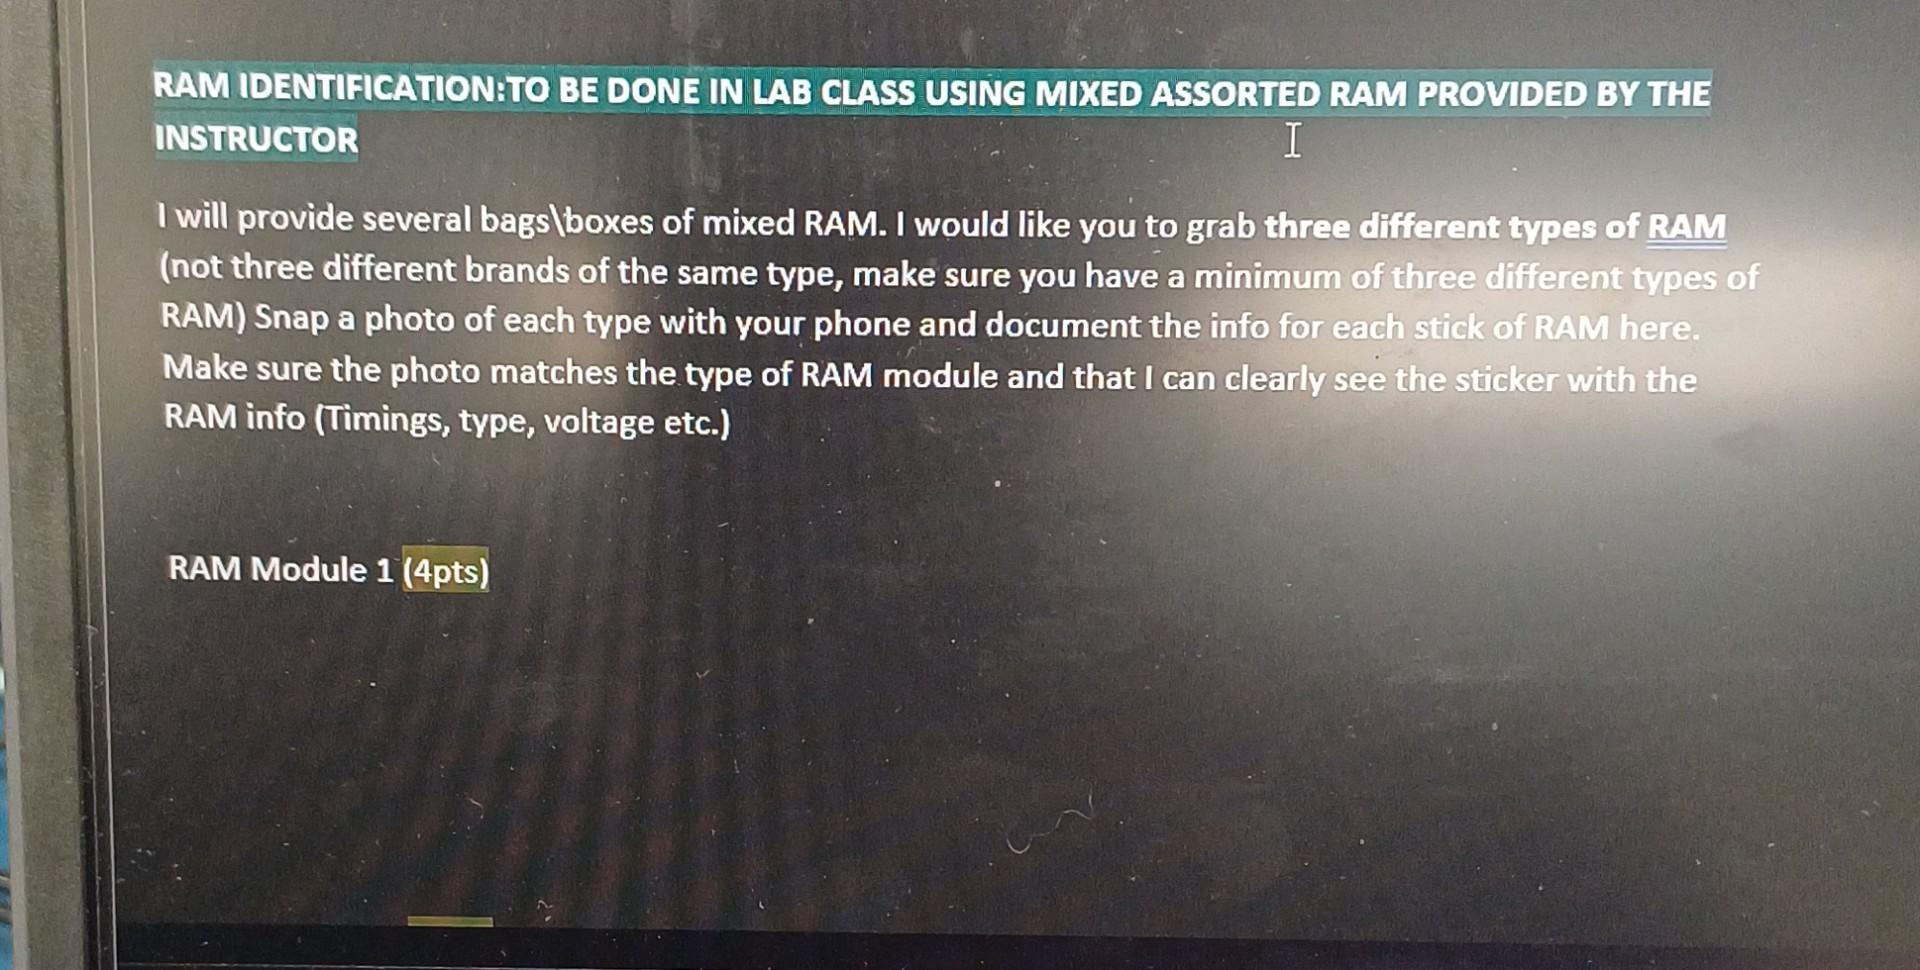 RAM IDENTIFICATION:TO BE DONE IN LAB CLASS USING MIXED ASSORTED RAM PROVIDED BY THE I INSTRUCTOR I will